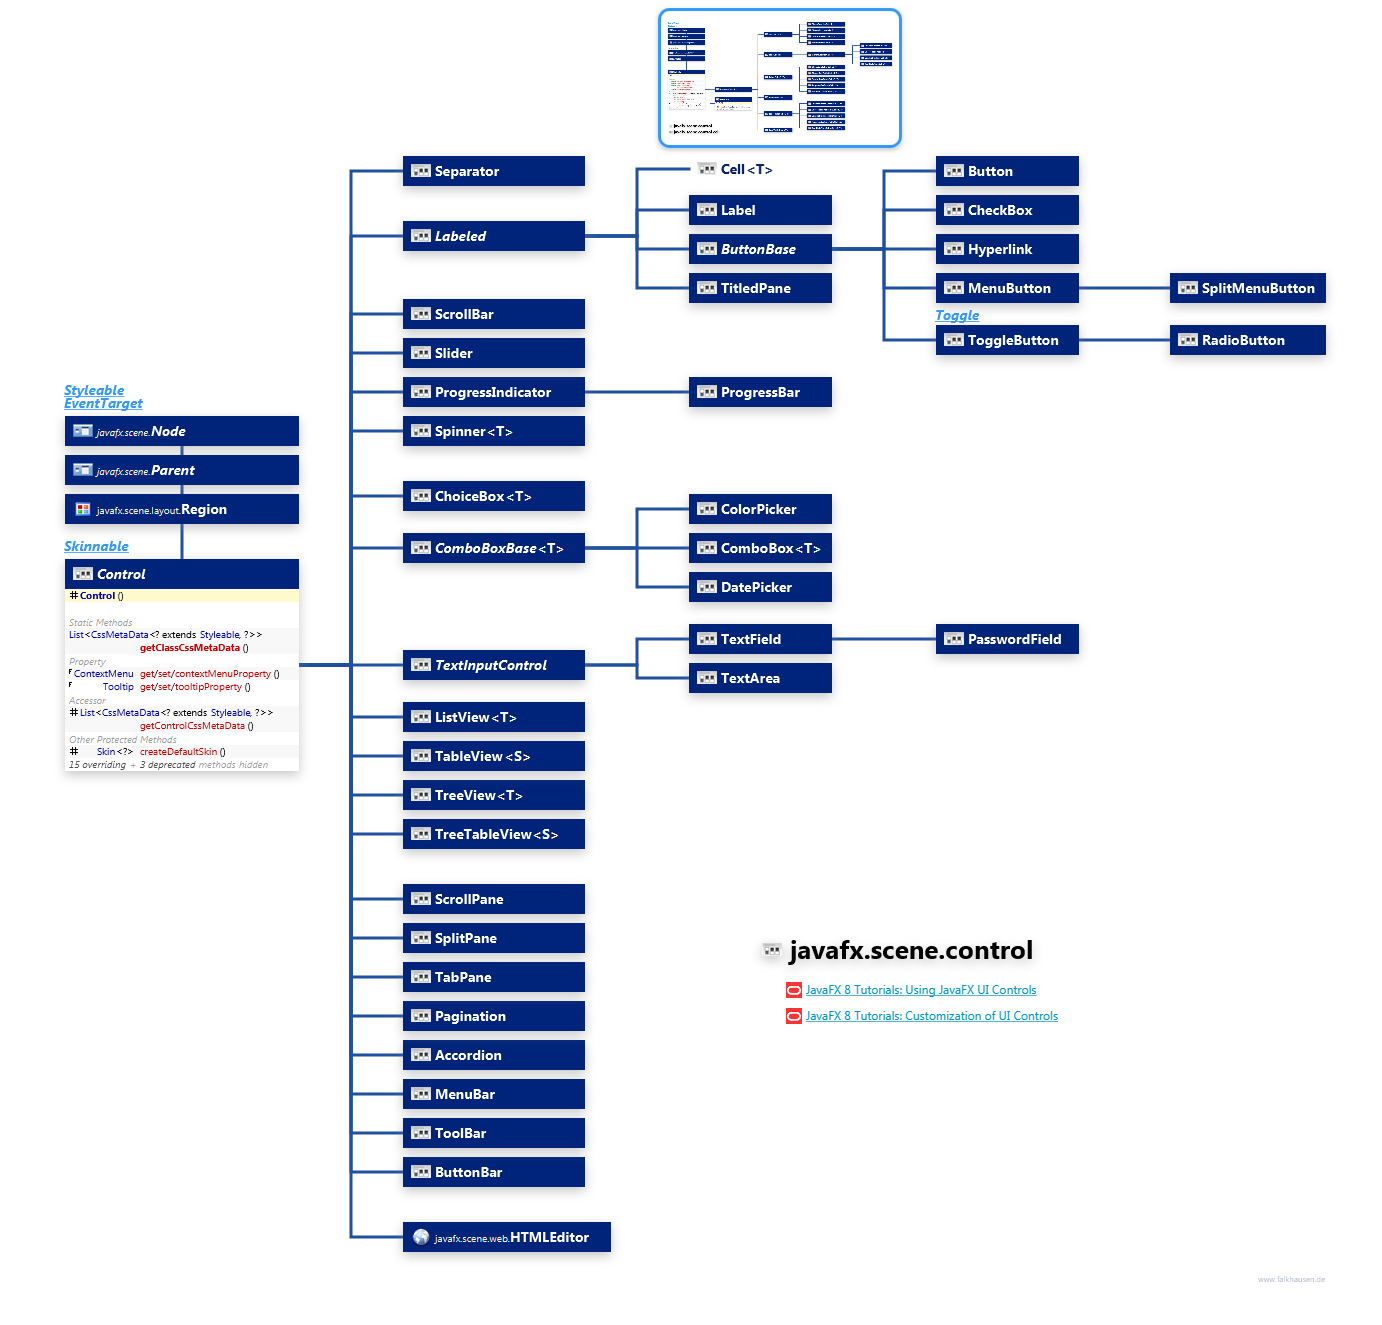 javafx.scene.control Control Hierarchy class diagram and api documentation for JavaFX 8